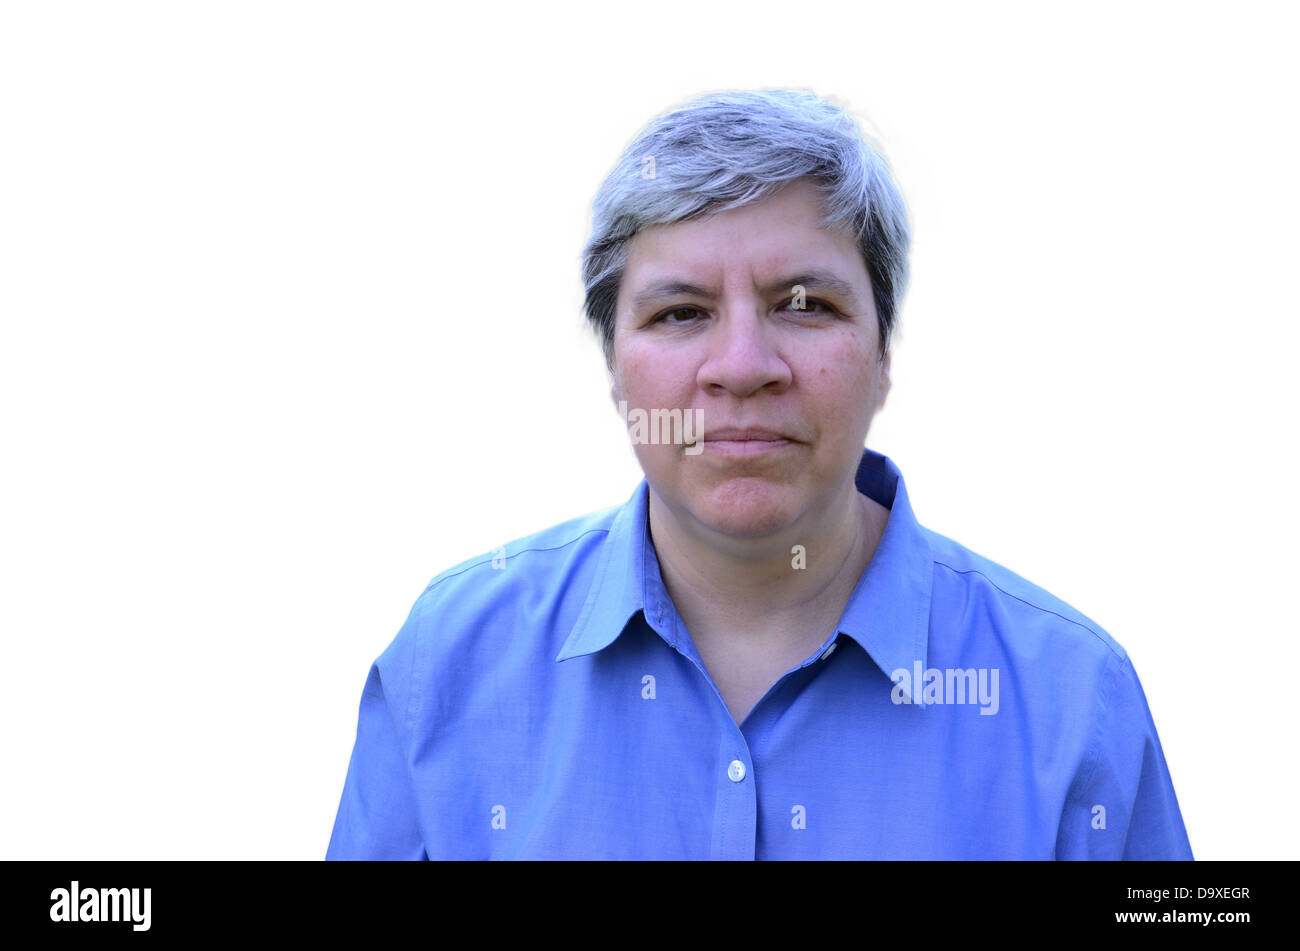 MIddle aged woman head shot with blue shirt isolated Stock Photo